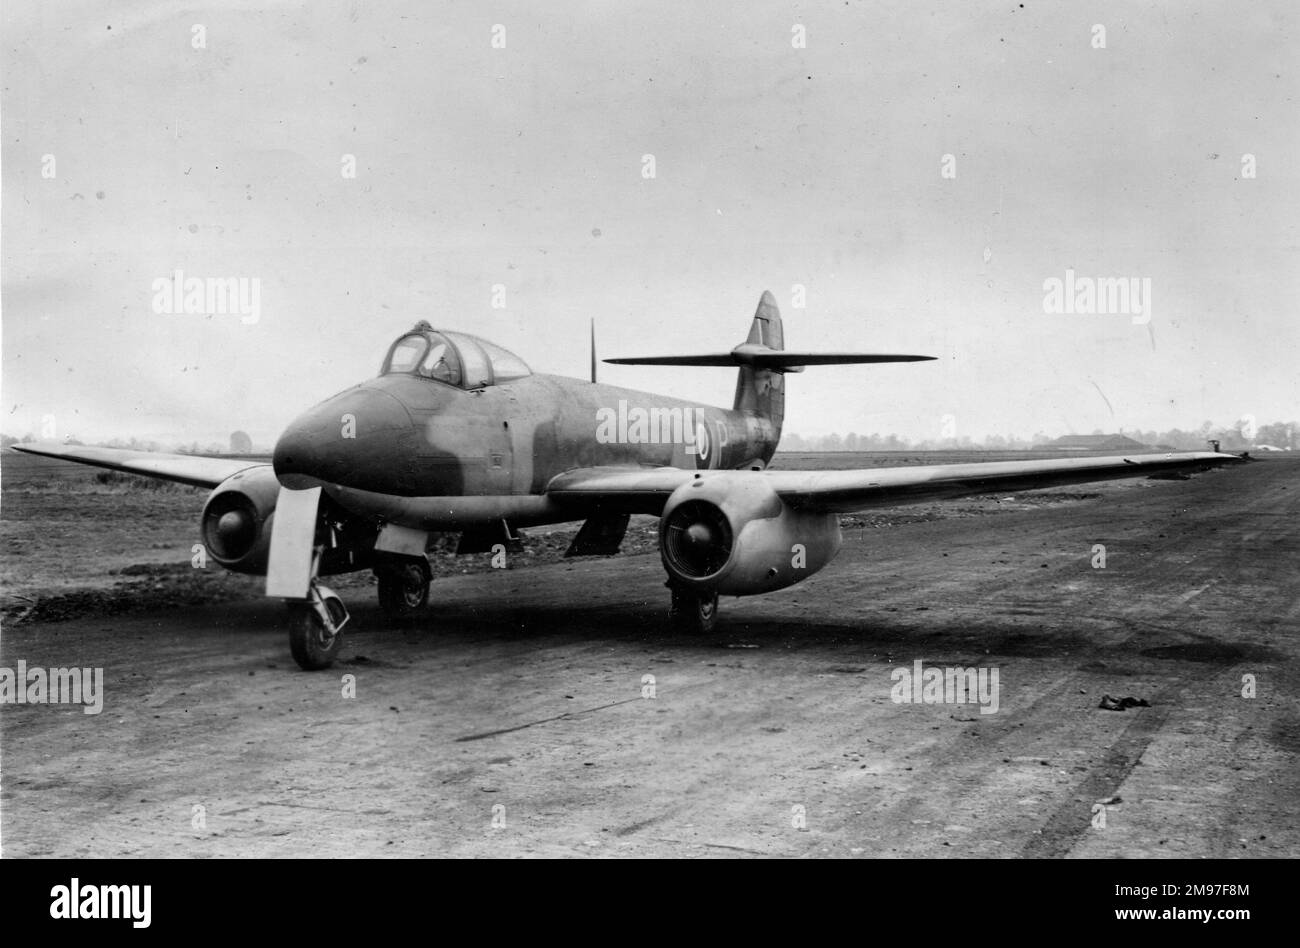 Gloster F9-40 Rampage, Britain's first jet fighter, subsequently renamed Meteor (F = Fighter, 9 = 9th, 40 = 1940, year of issue). Gloster Meteor prototype DG204/G powered by Metrovick F.2 engines. Stock Photo